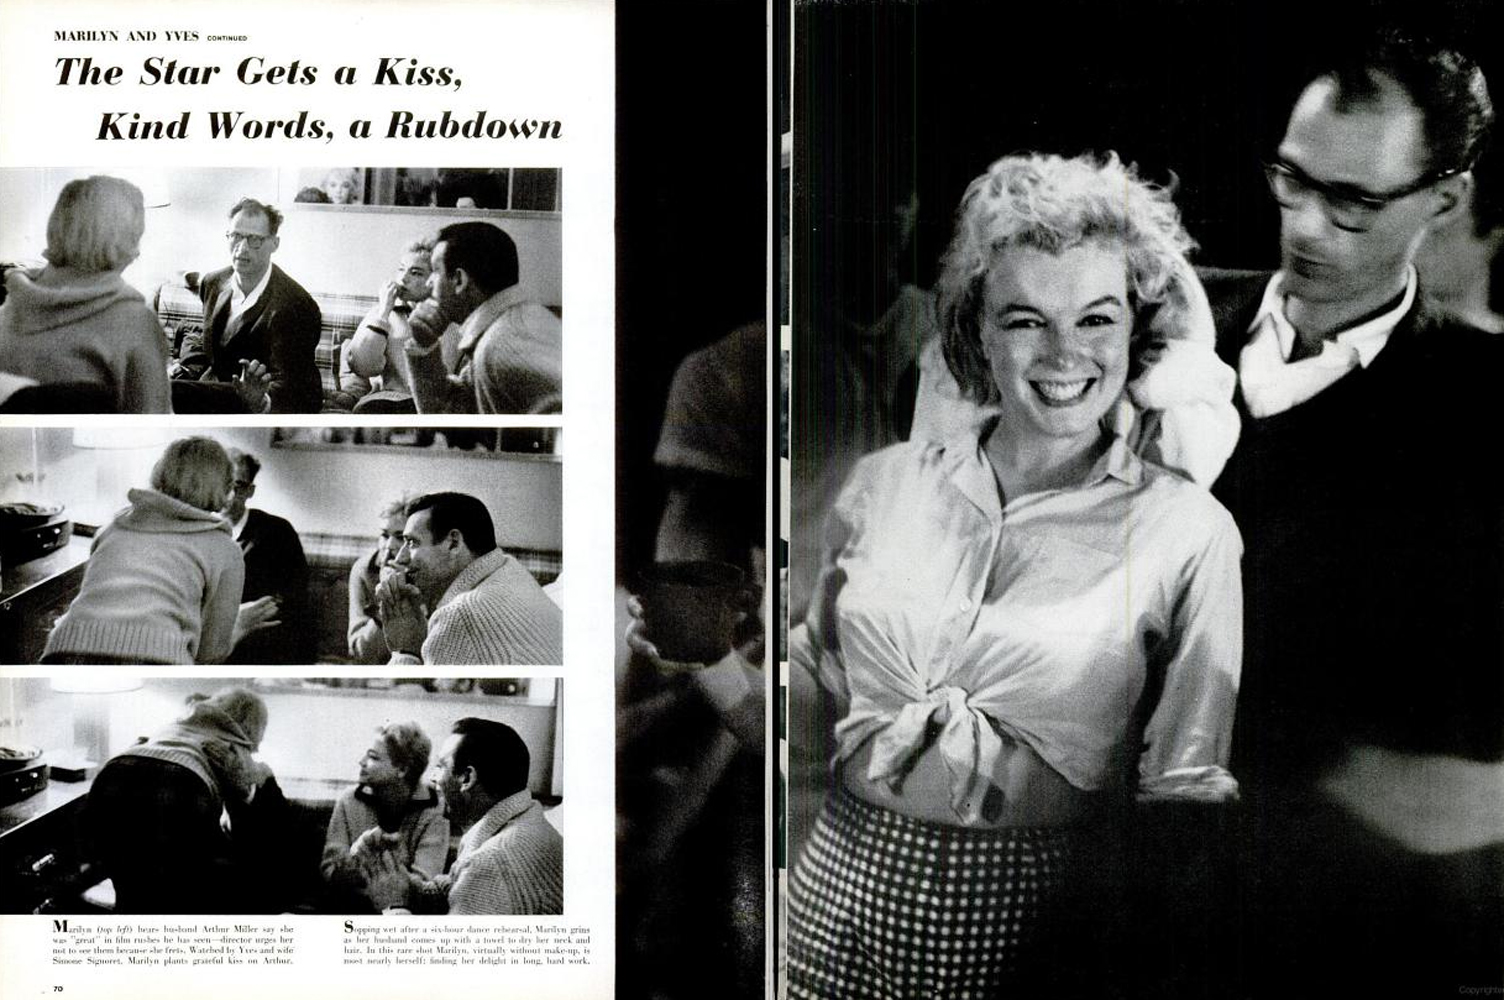 Page spreads from the August 15, 1960, issue of LIFE Magazine.